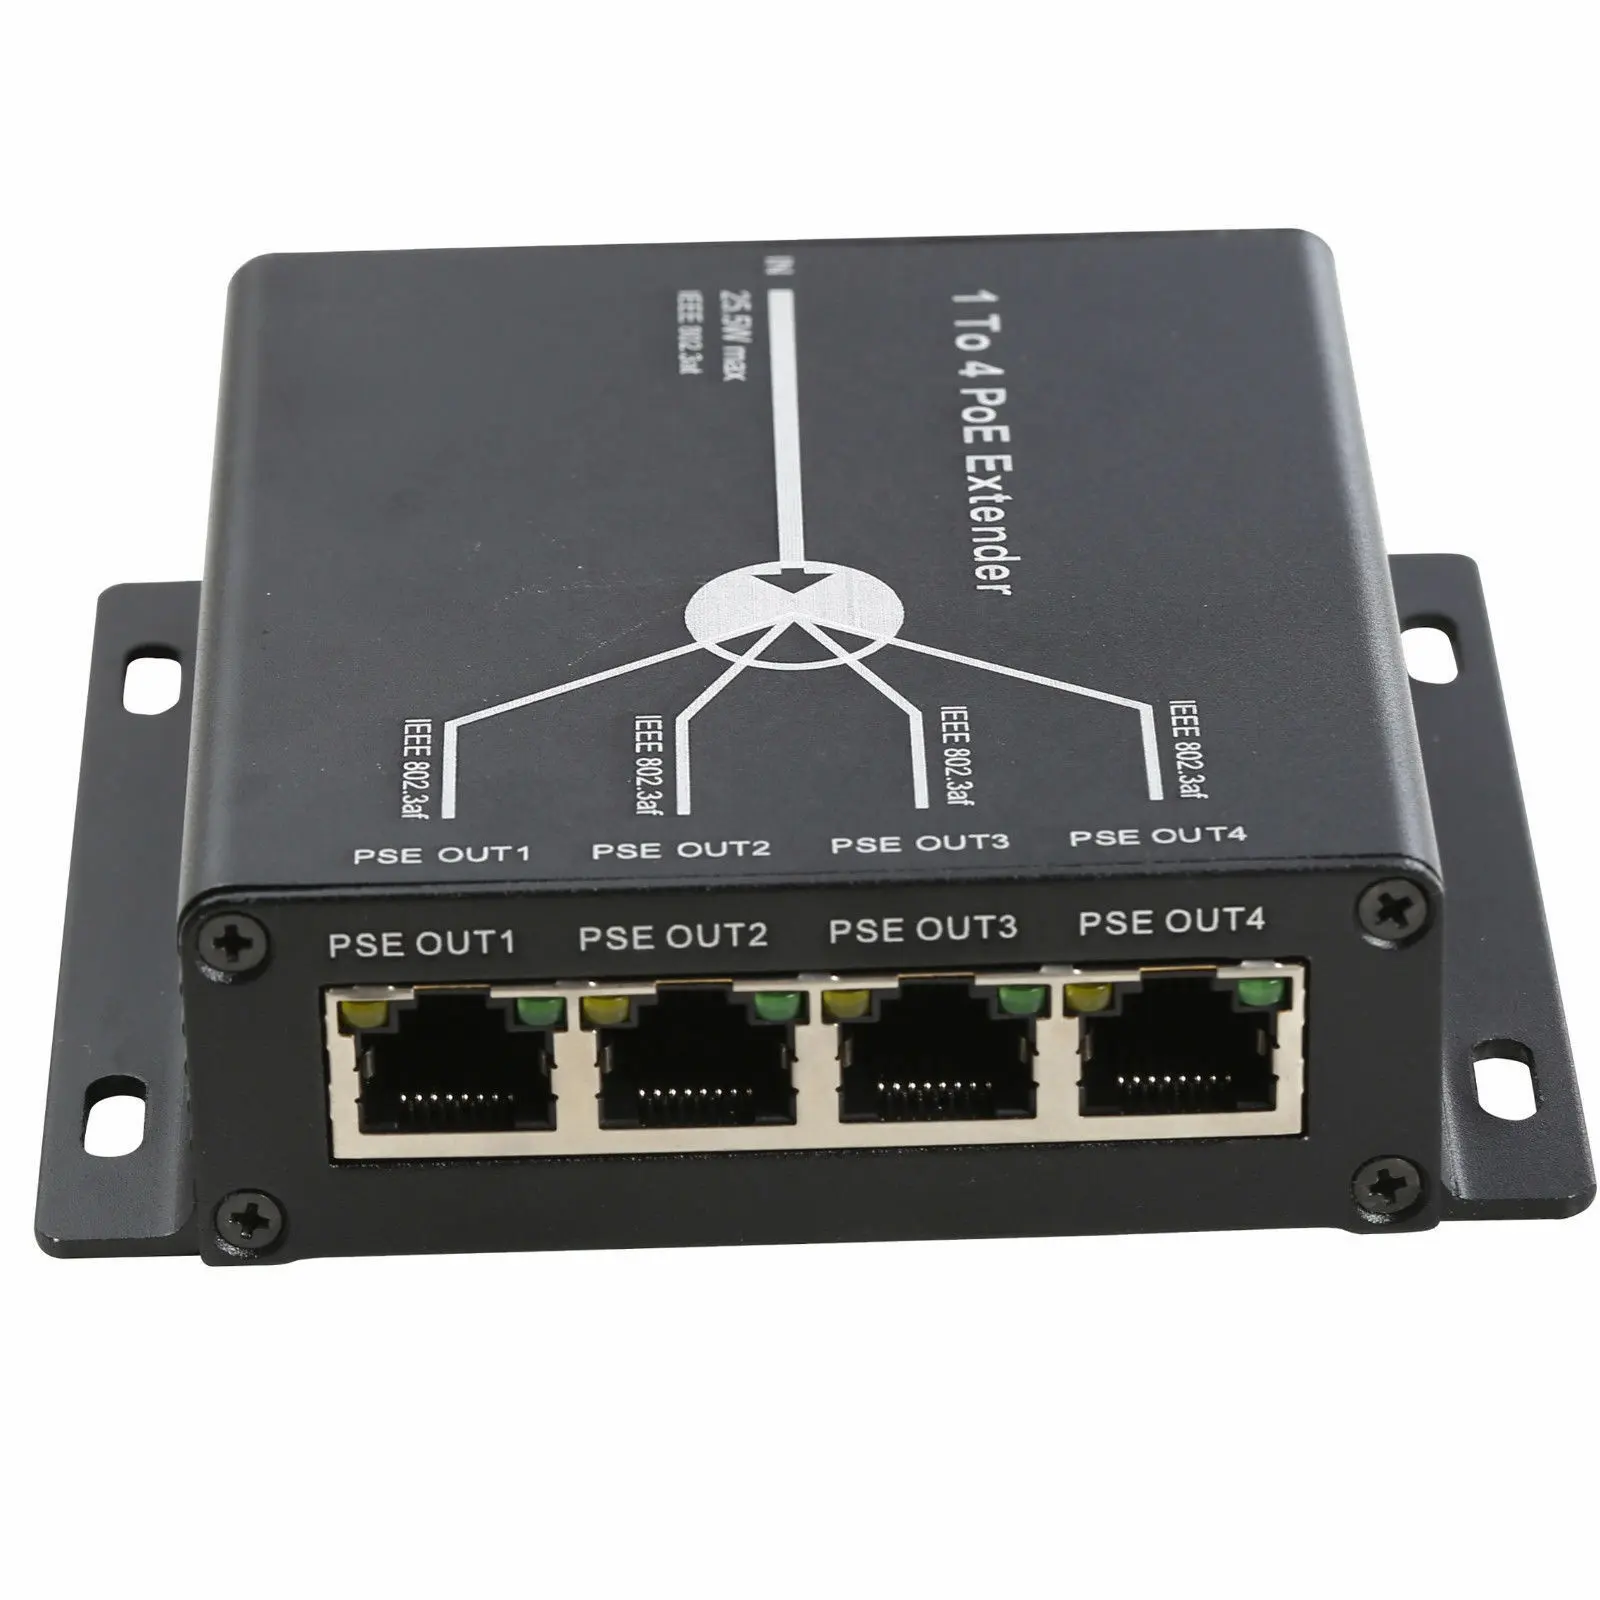 Power over ethernet Switch Porta 4 10/100M IEEE802.3af Para Câmera IP PoE Extender Repeater